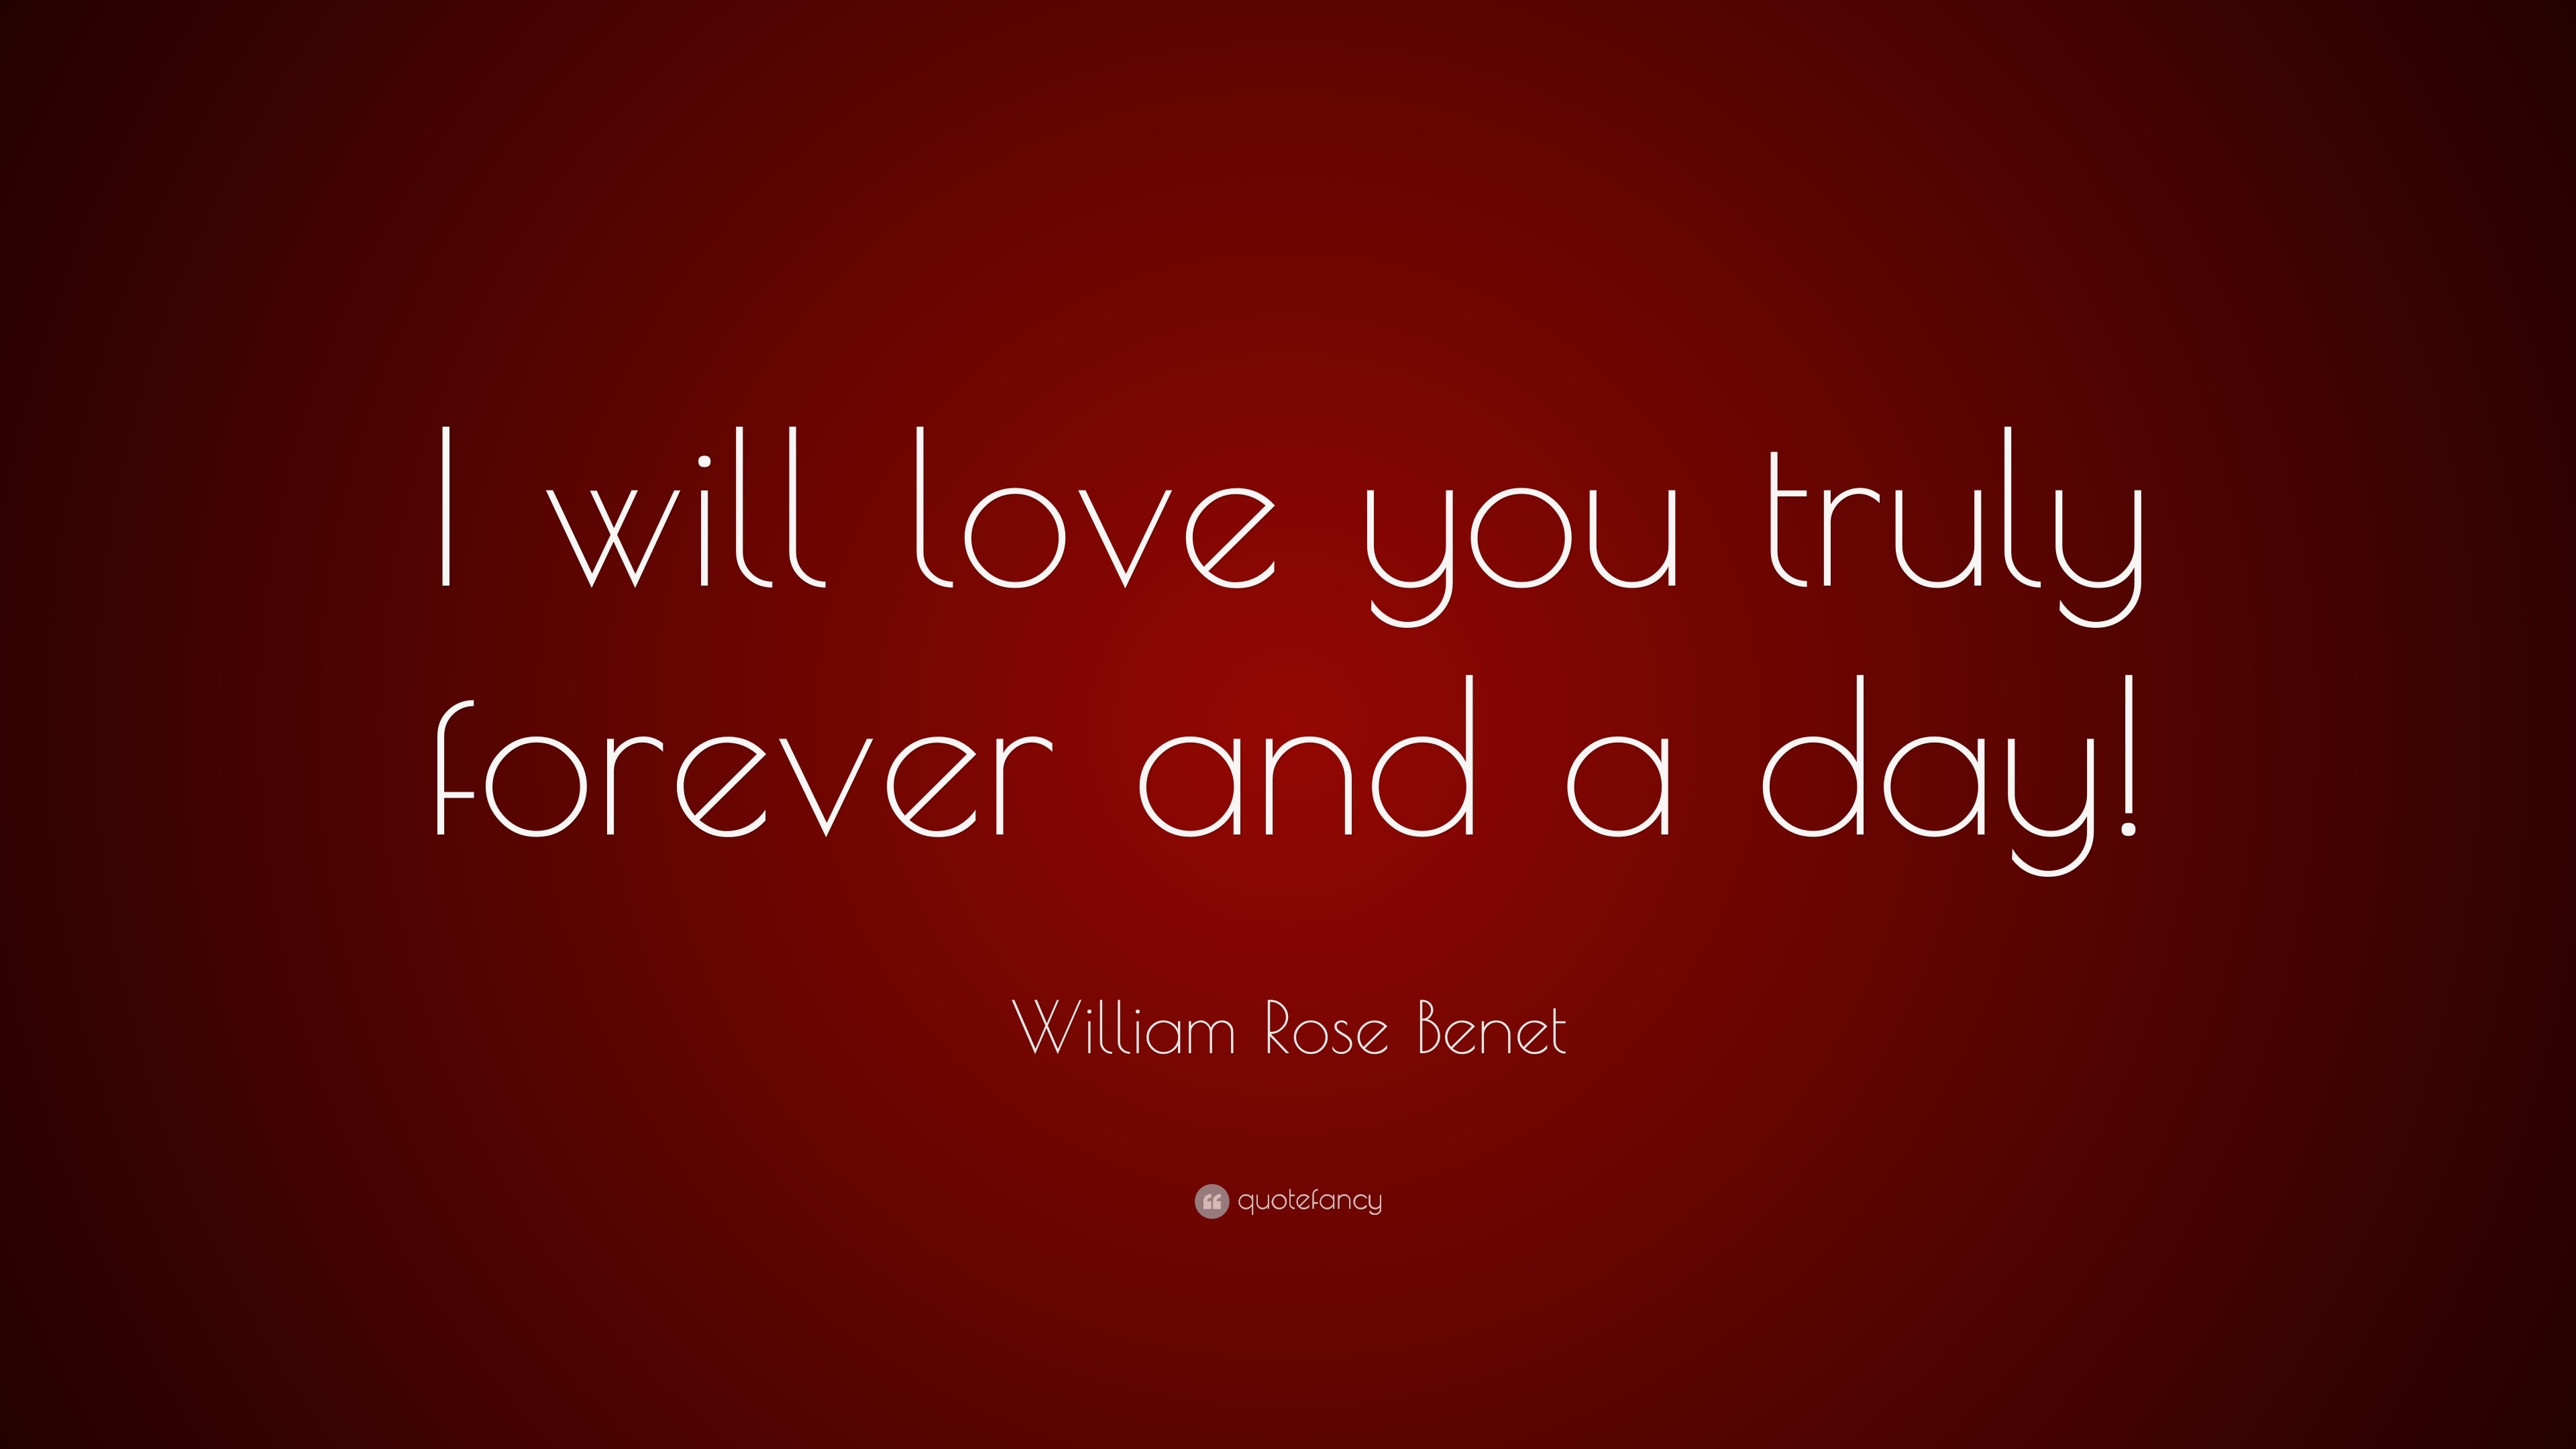 William Rose Benet Quote I Will Love You Truly Forever And A Day 7 Wallpapers Quotefancy